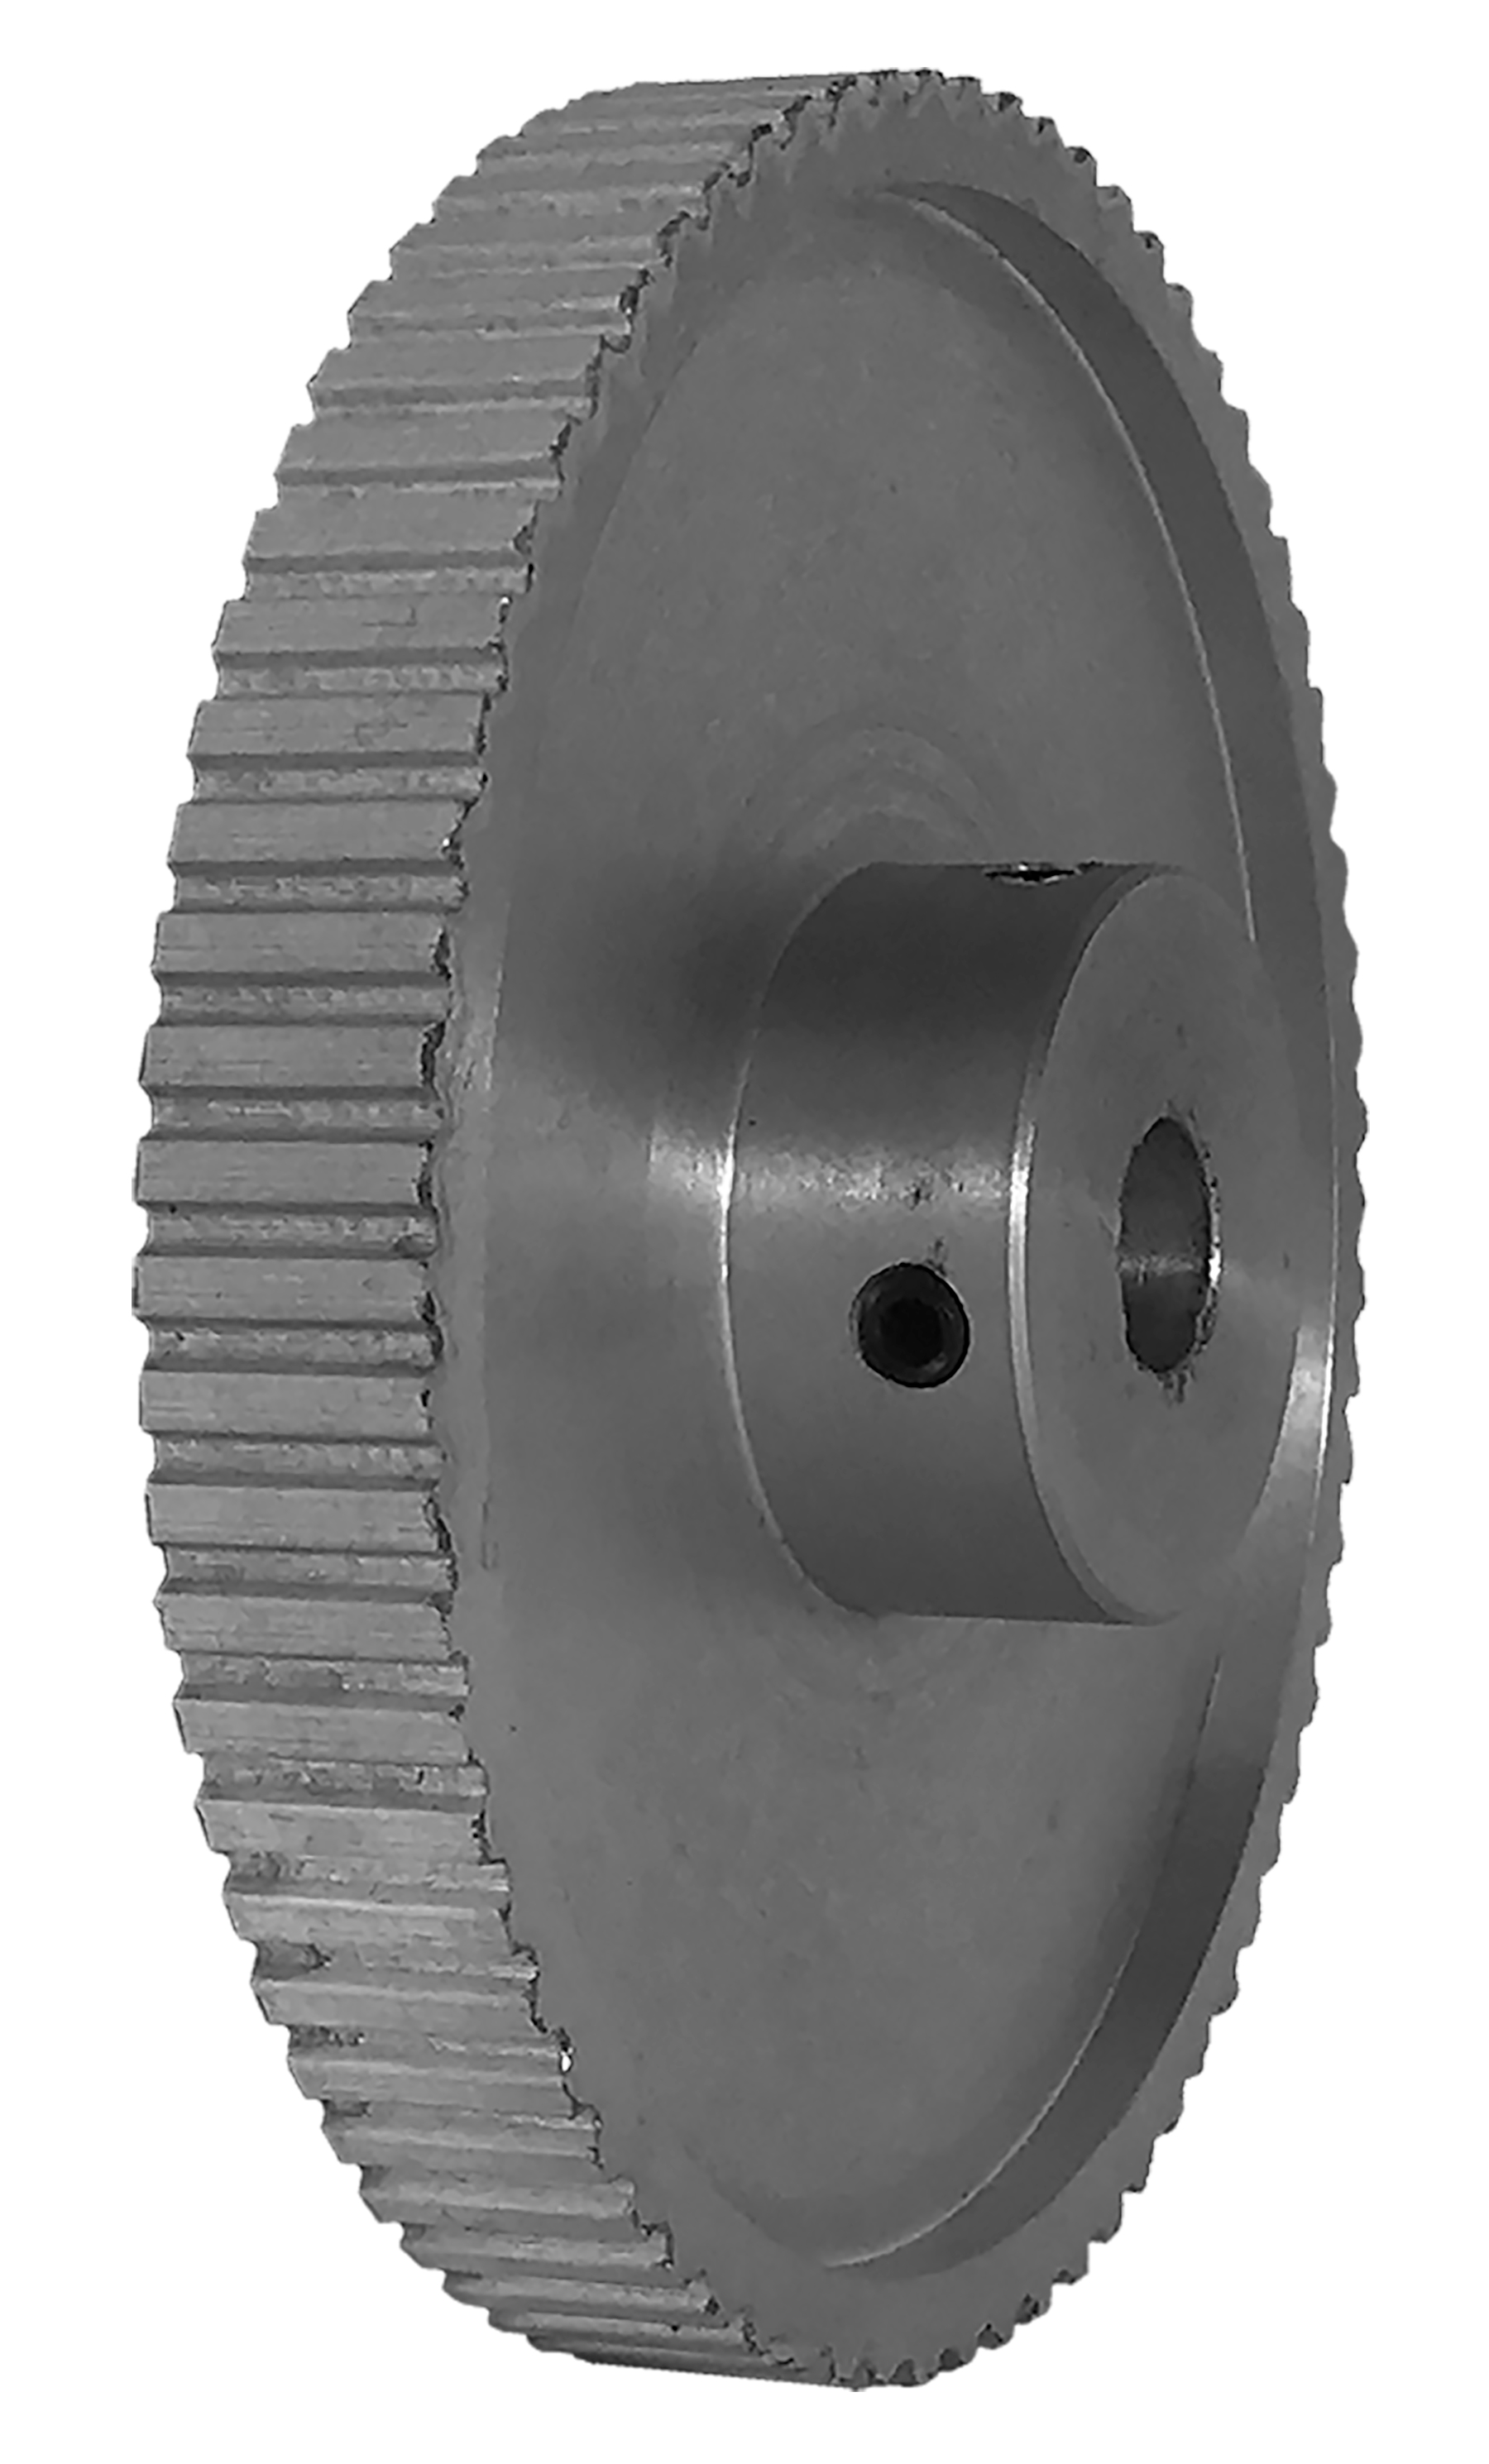 72XL037-6WA6 - Aluminum Imperial Pitch Pulleys